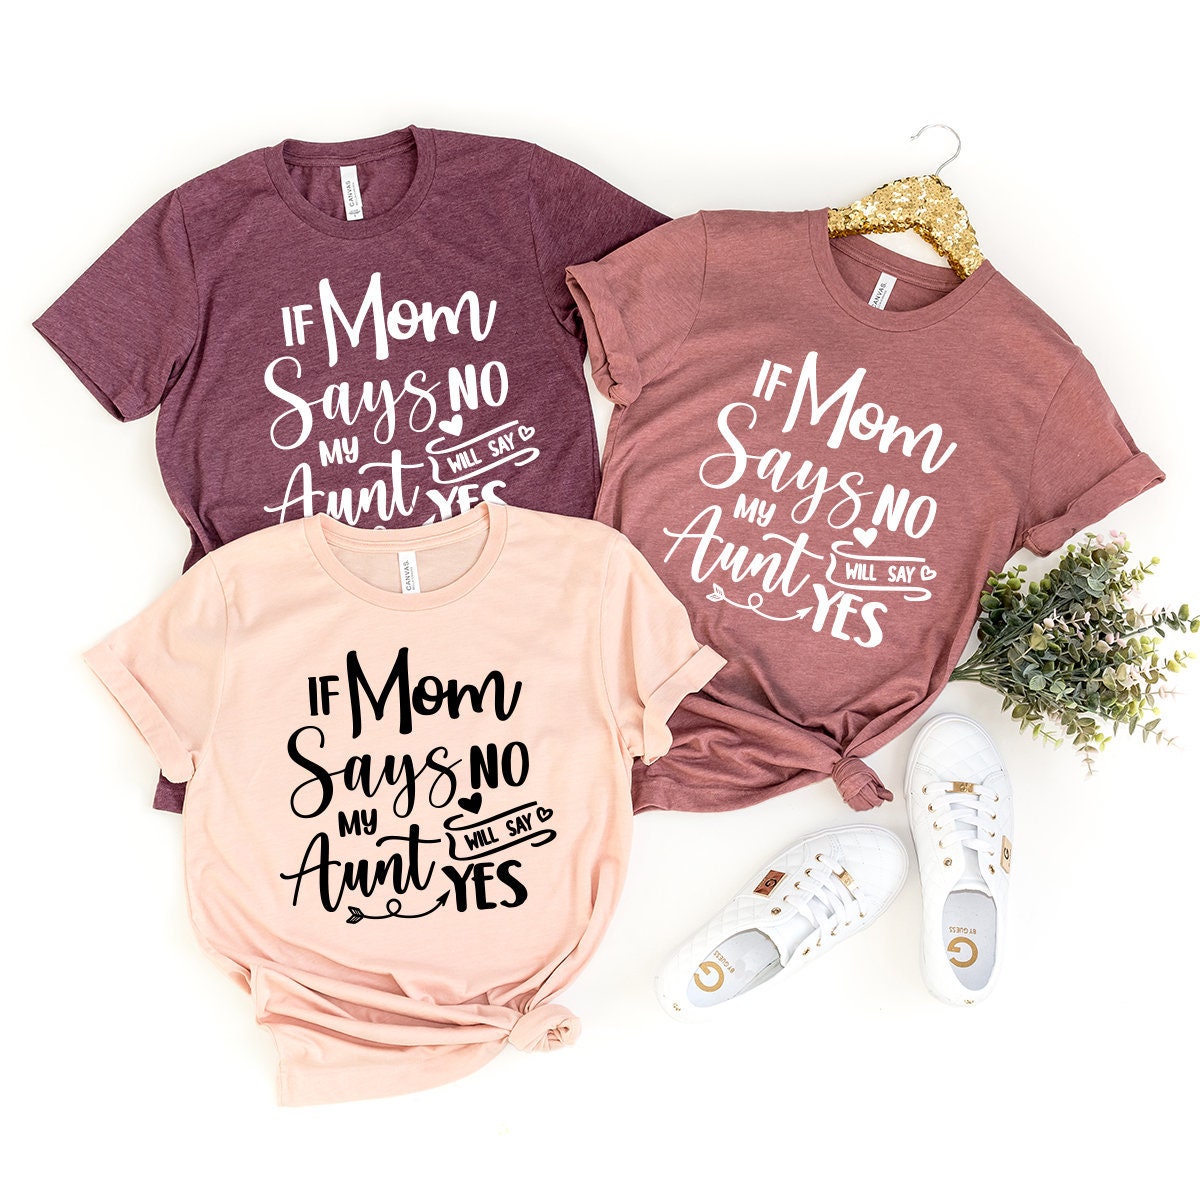 Funny Aunt Shirts, Gift For Aunt, Aunt T-shirt, Best Auntie Ever Tee, Auntie Tee, Aunt Gift, If Mom Says No My Aunt Will Say Yes Shirt - Fastdeliverytees.com